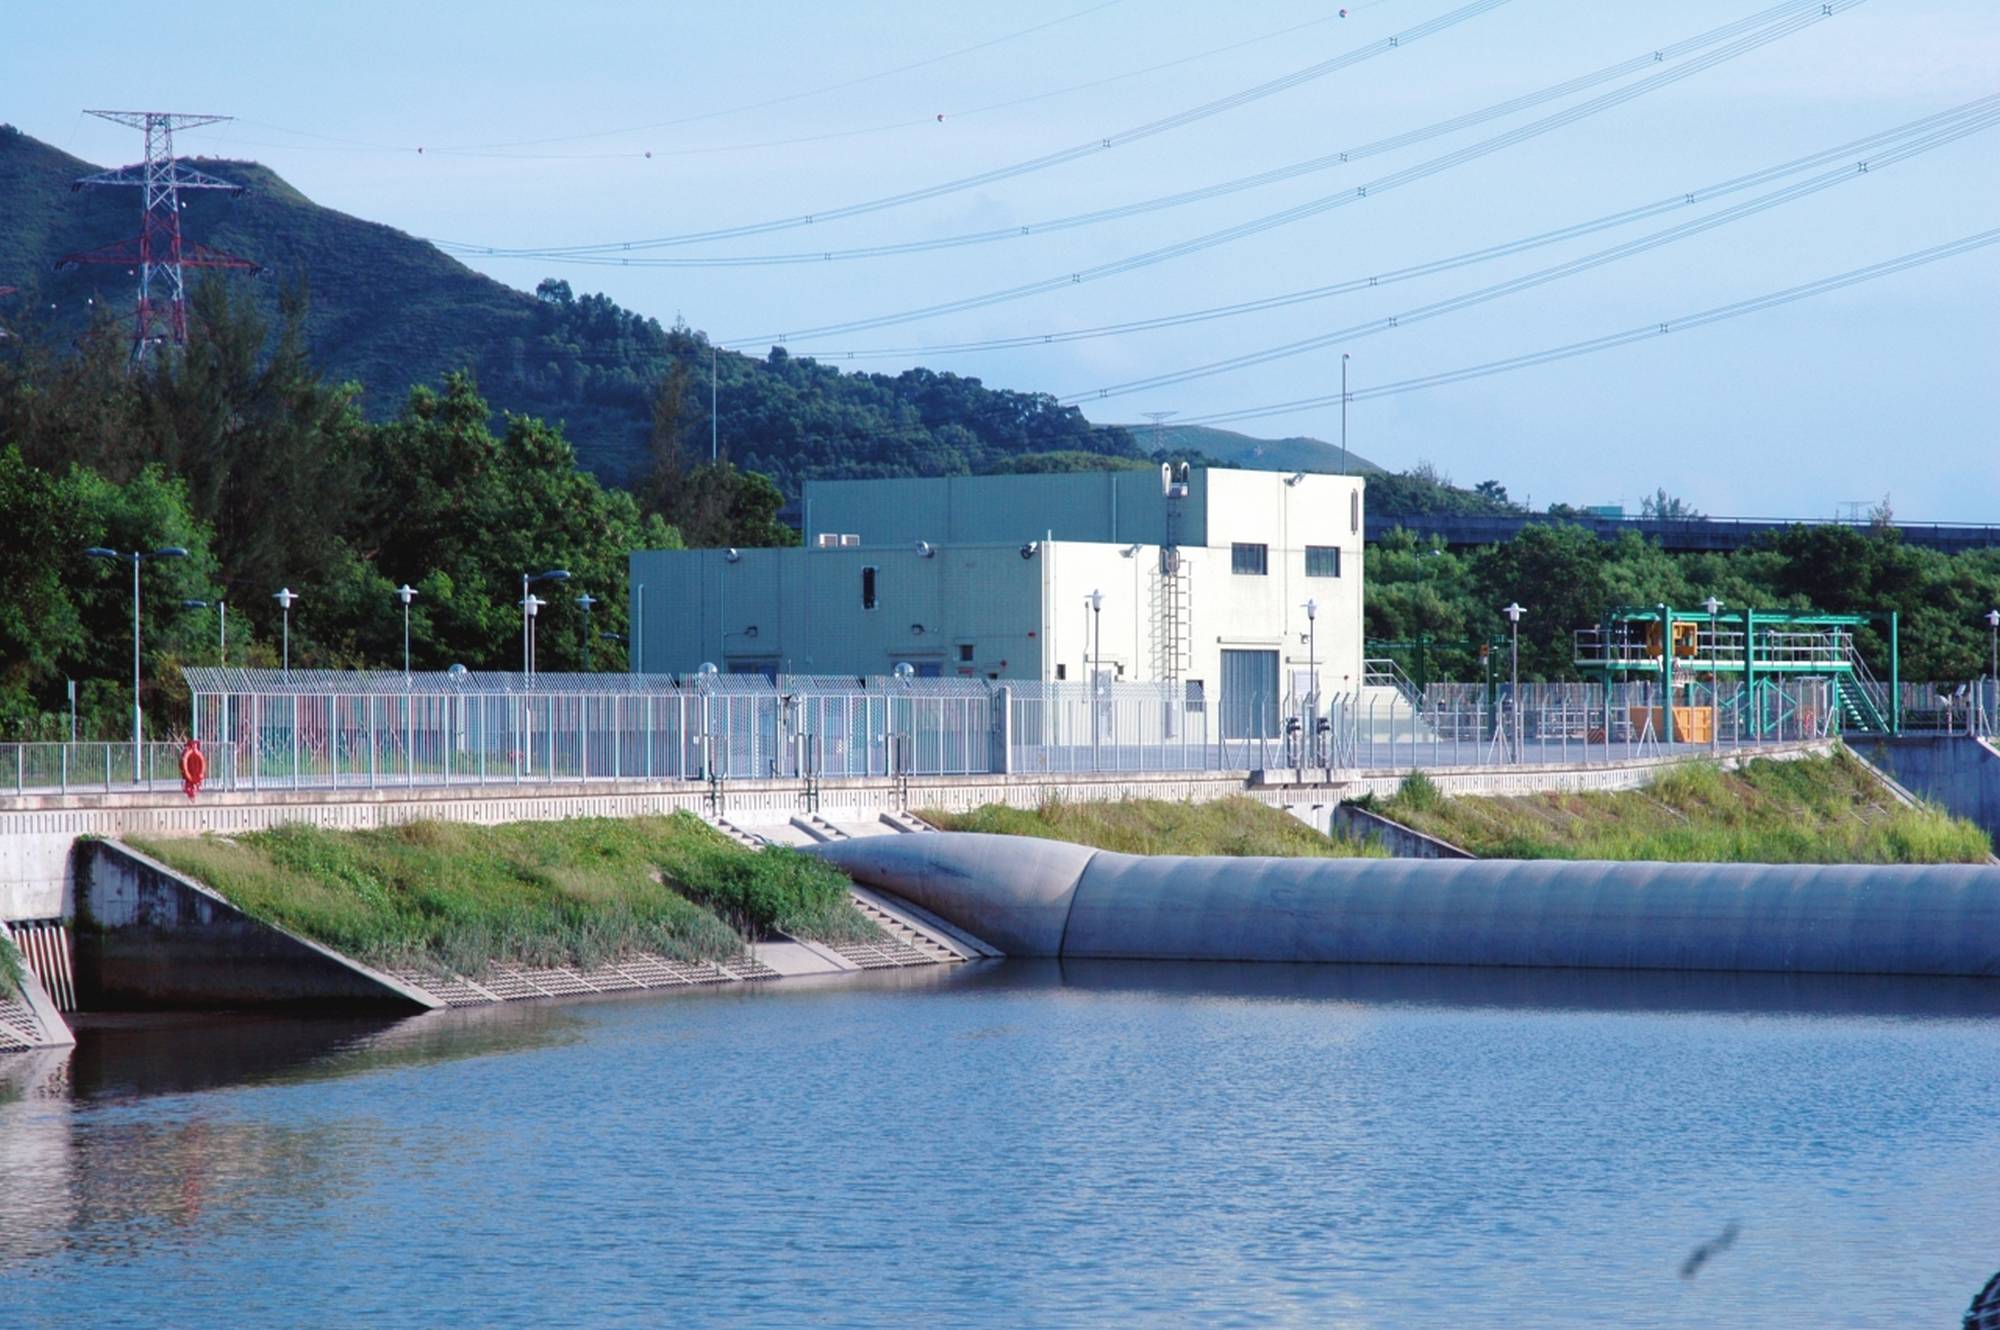 To control the water level of the Bypass Floodway and to prevent water downstream from flowing back into the channel, a system of dry weather flow pumping station and inflatable dam is built at the downstream end of Yuen Long Bypass Floodway. At times of heavy rainfall, the dam will automatically deflate and lower to allow flood water upstream to flow into Kam Tin River to mitigate flood risks.